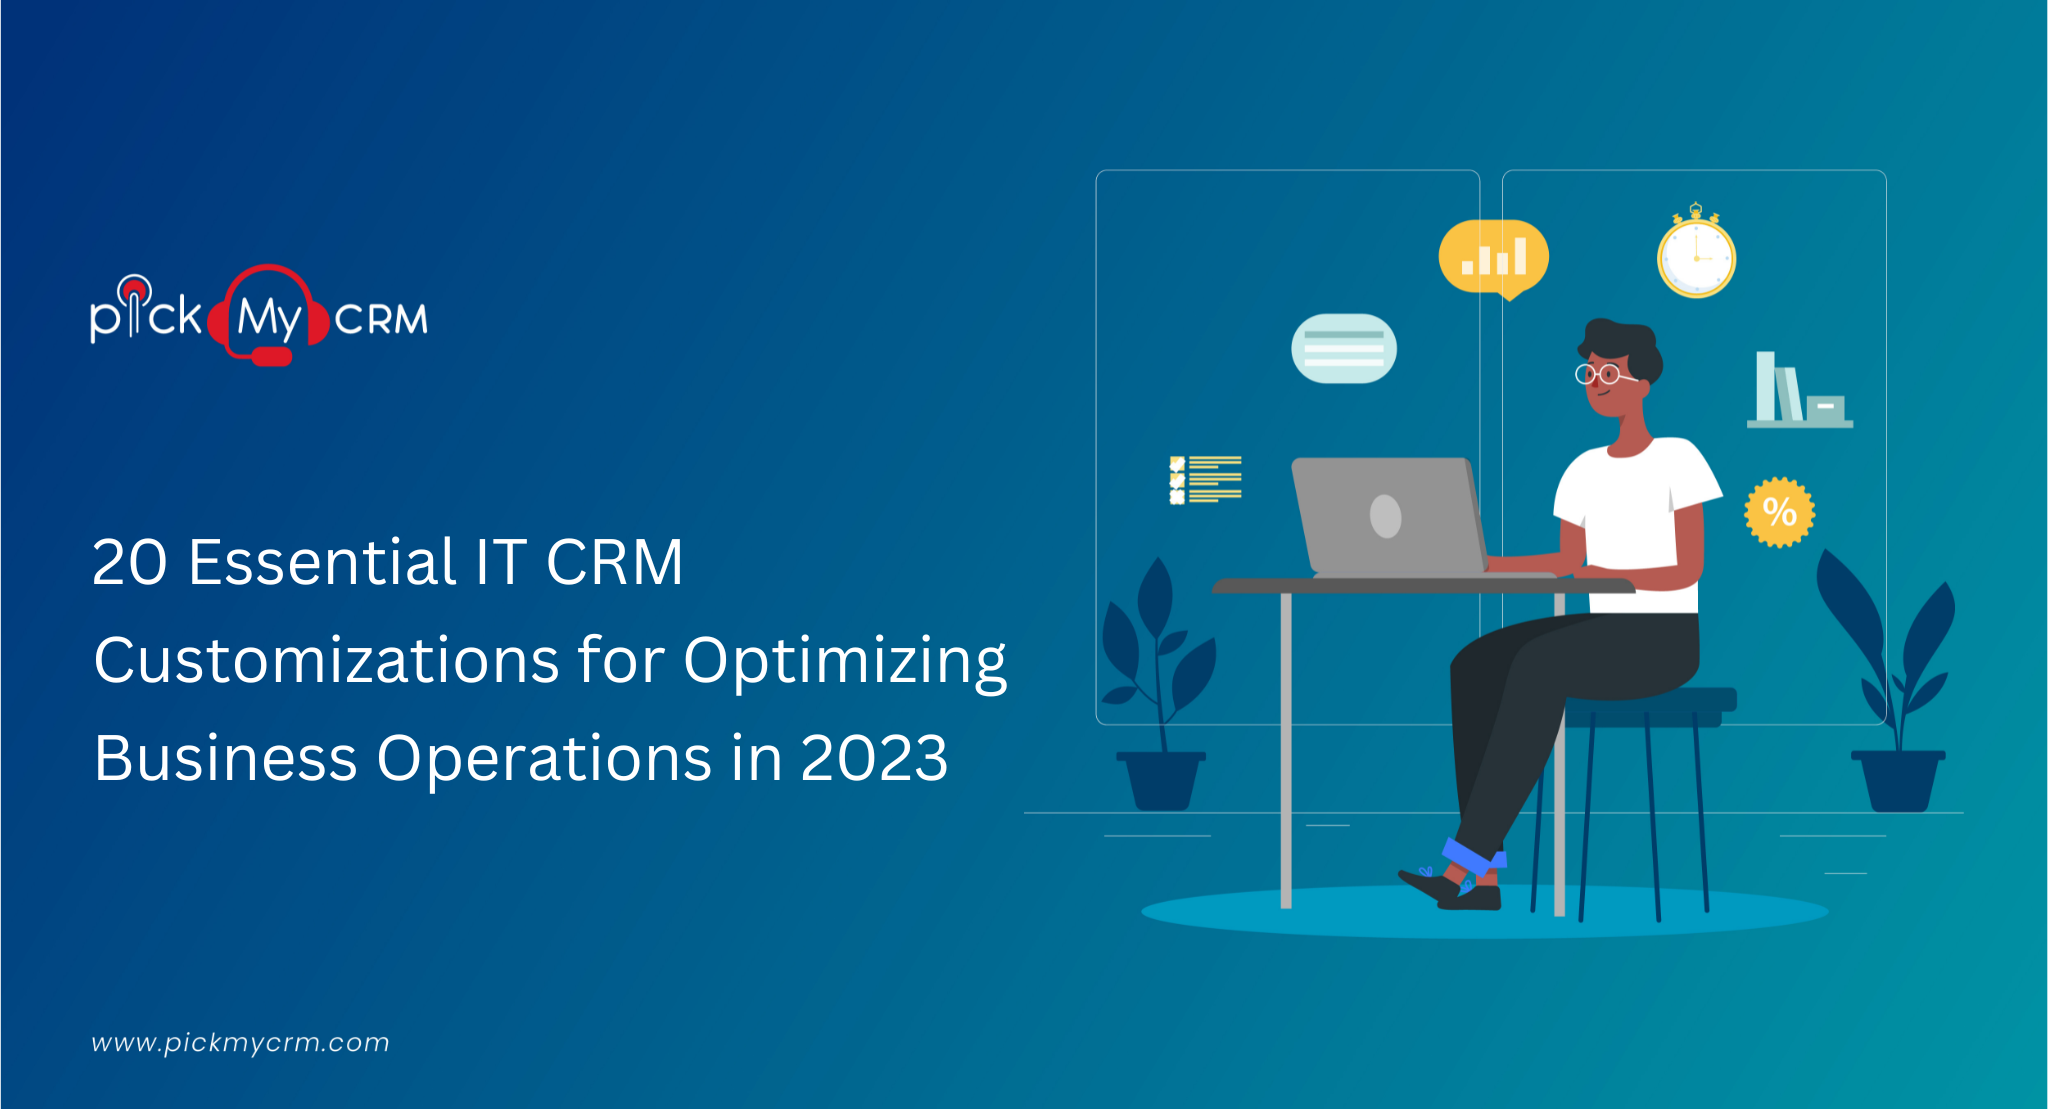 20 Essential IT CRM Customizations for Optimizing Business Operations in 2023